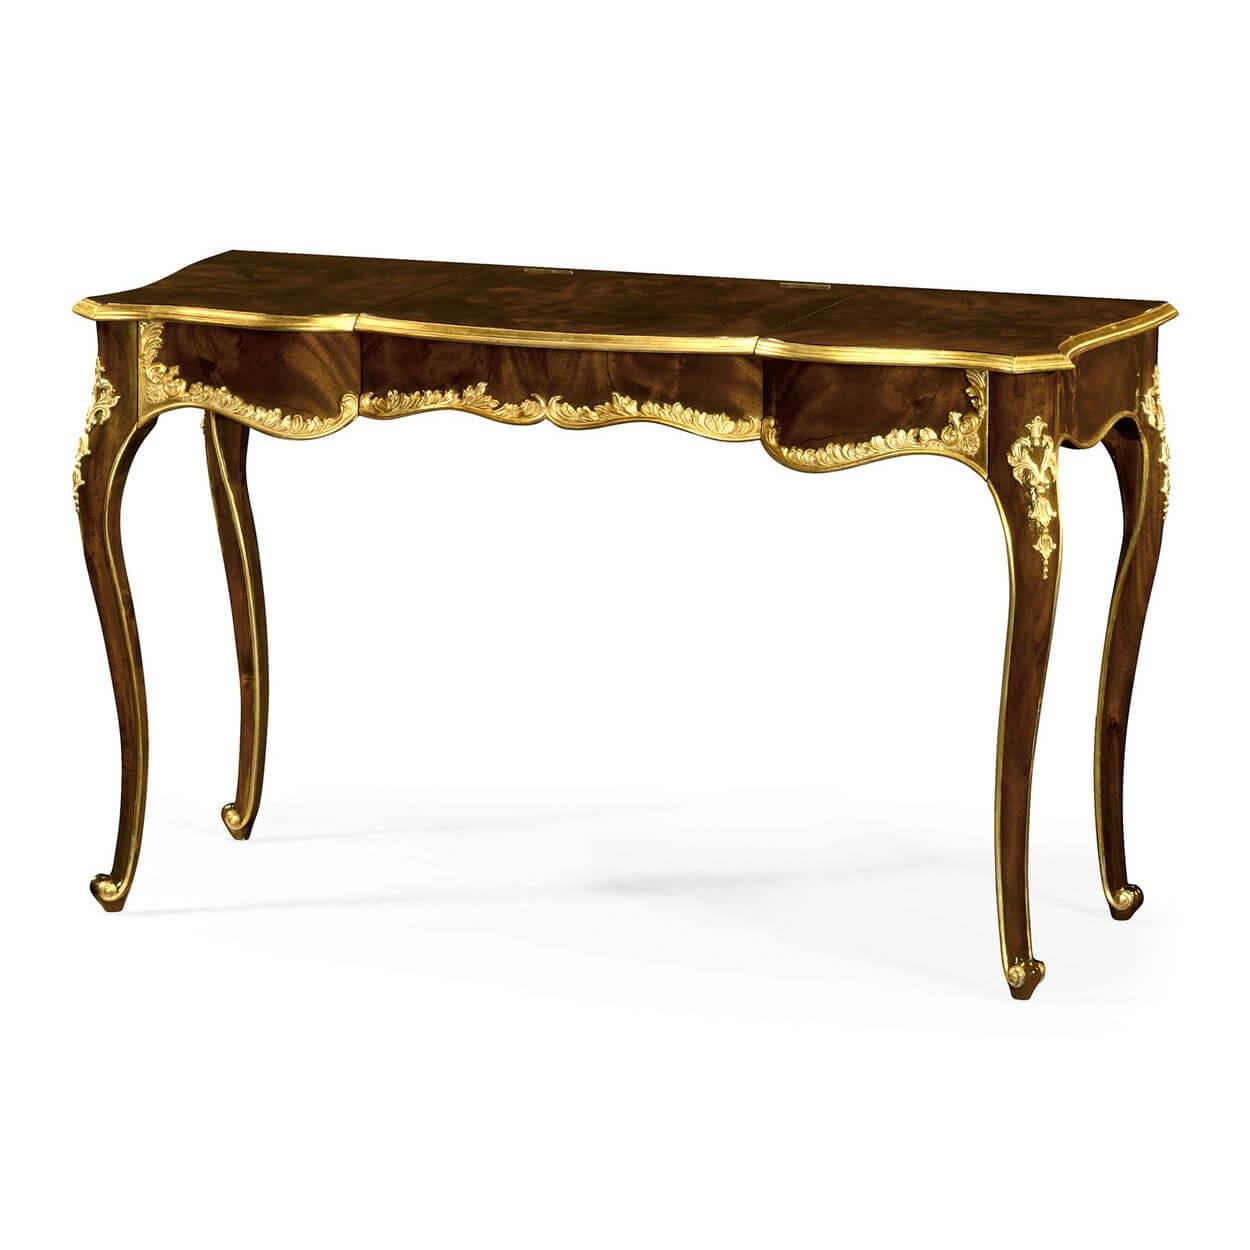 A fine English Chippendale style Rococo mahogany dressing table with a serpentine front, carved and gilded leaf edge, fitted with a dressing mirror, jewelry boxes, and internal drawers, raised and cabriole legs and scroll feet.

Dimensions: 50